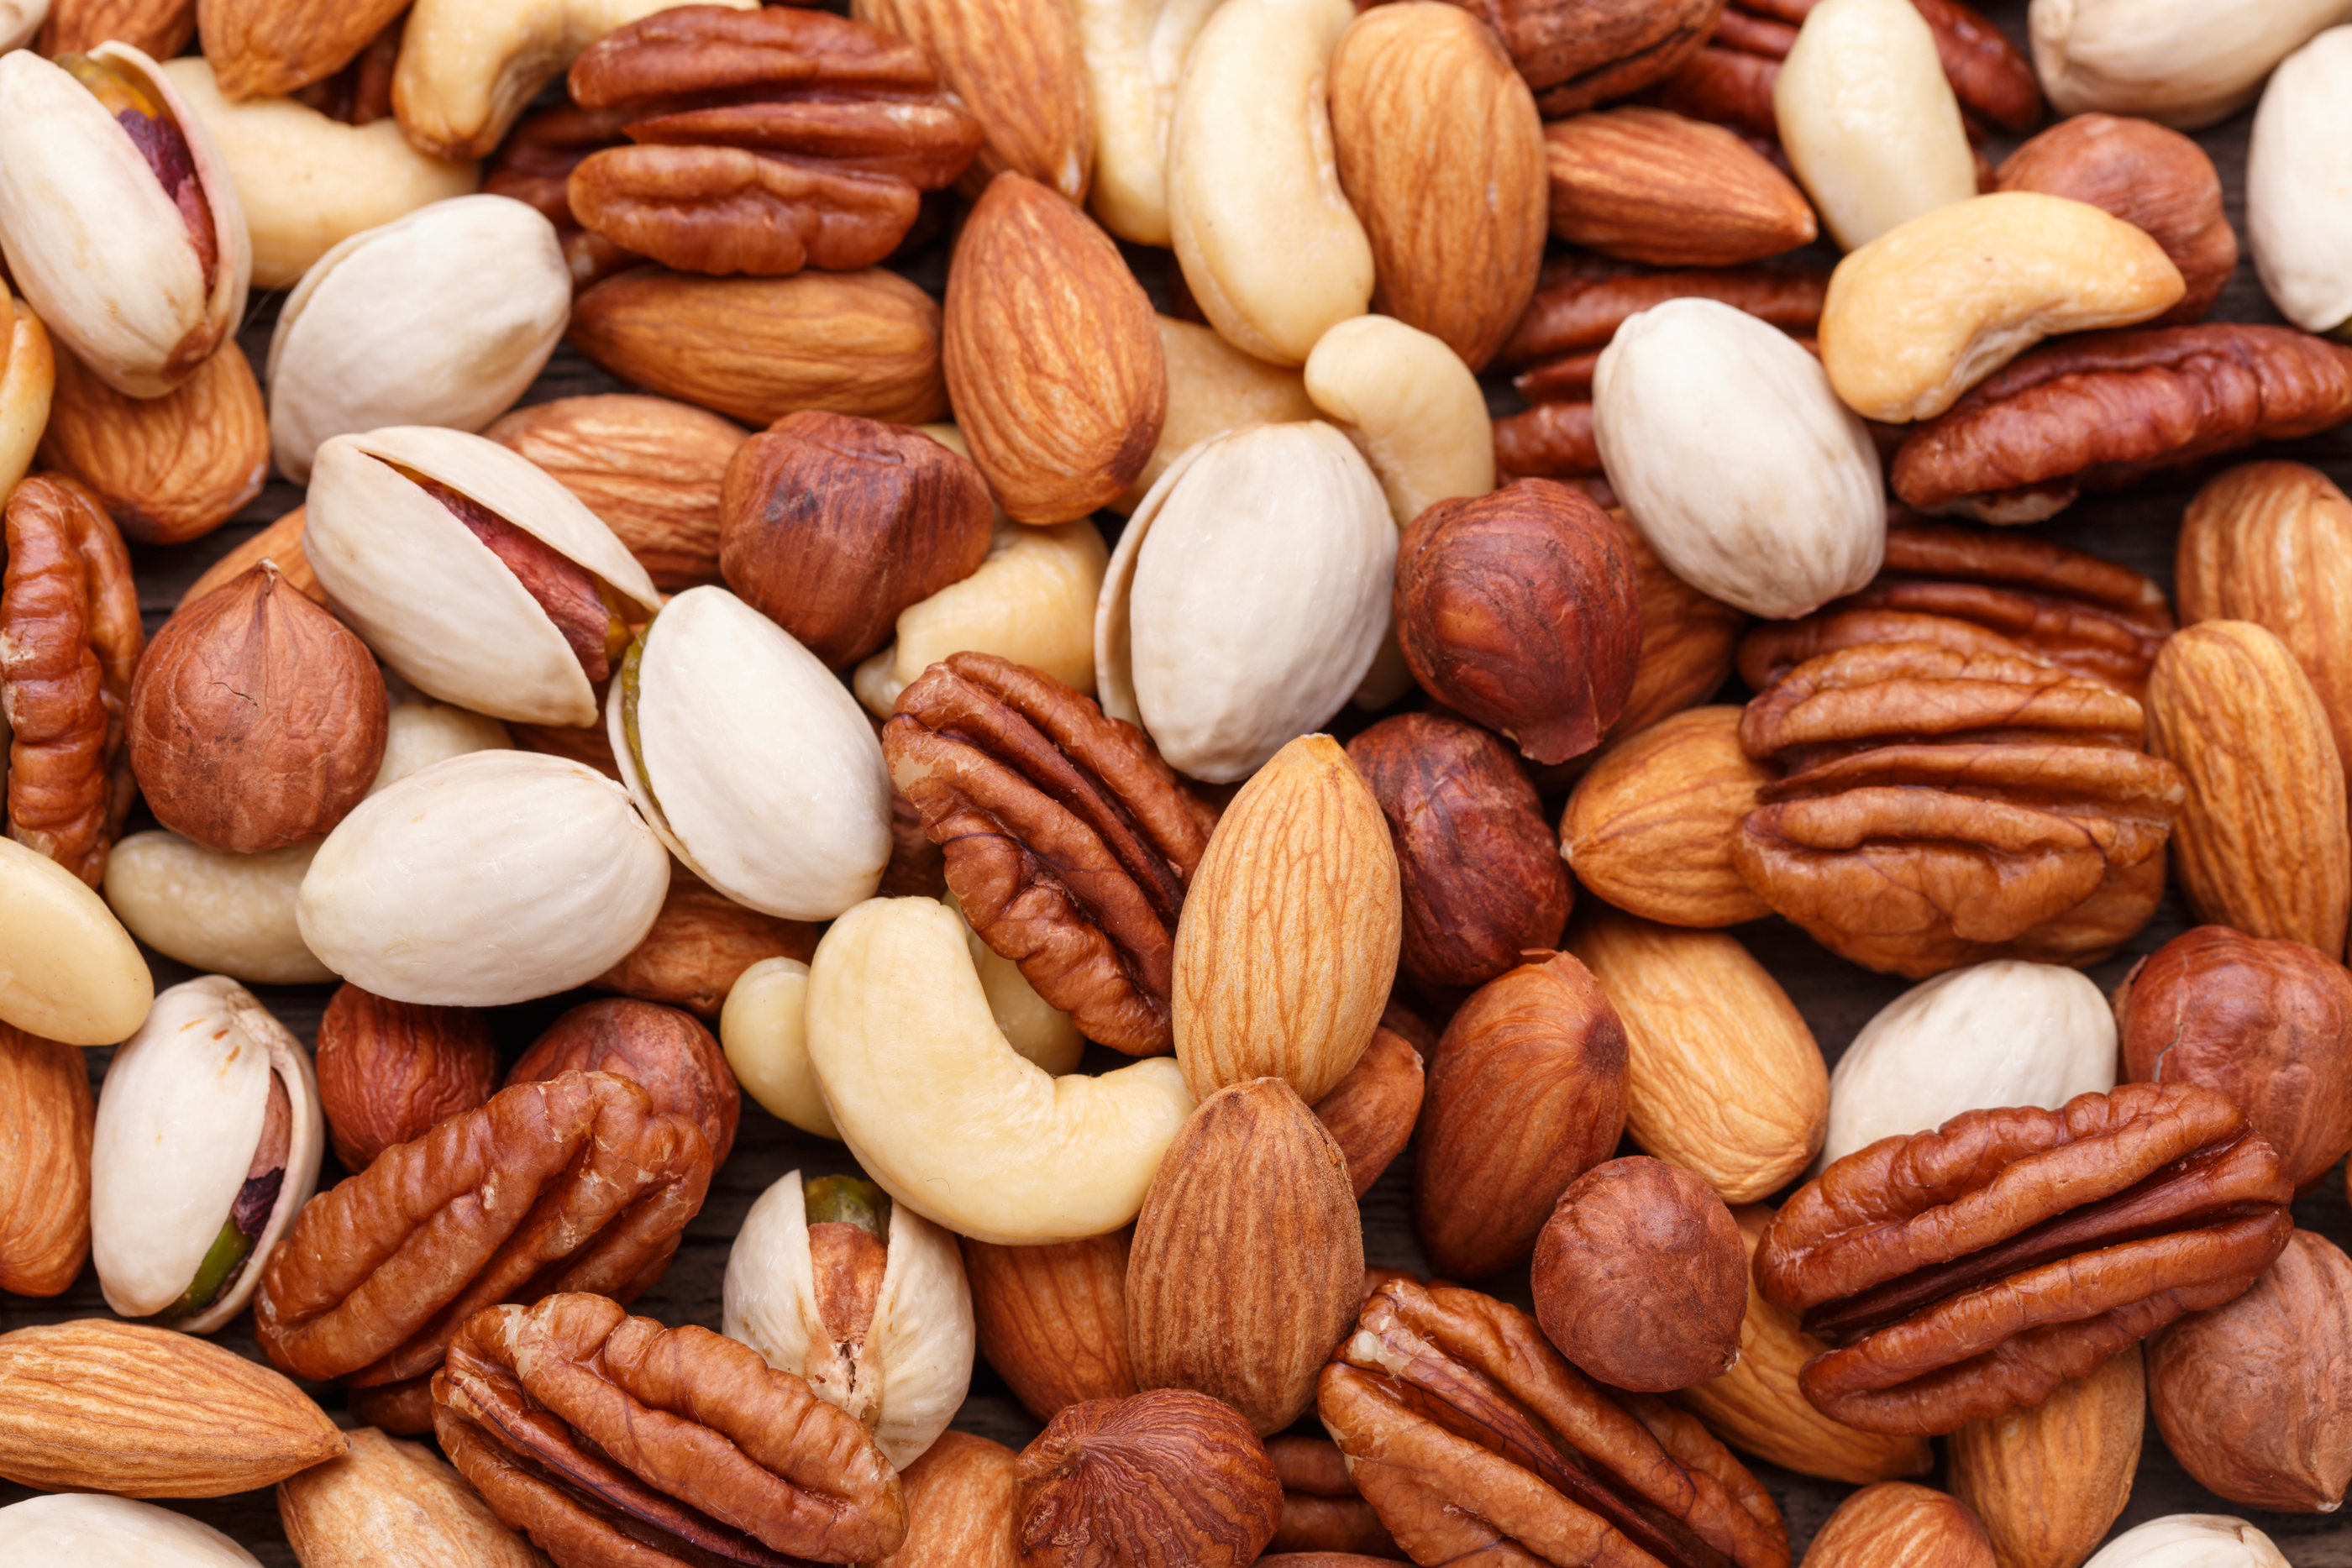 What is your advice on the benefits of eating nuts? - Ask Doctor K ...